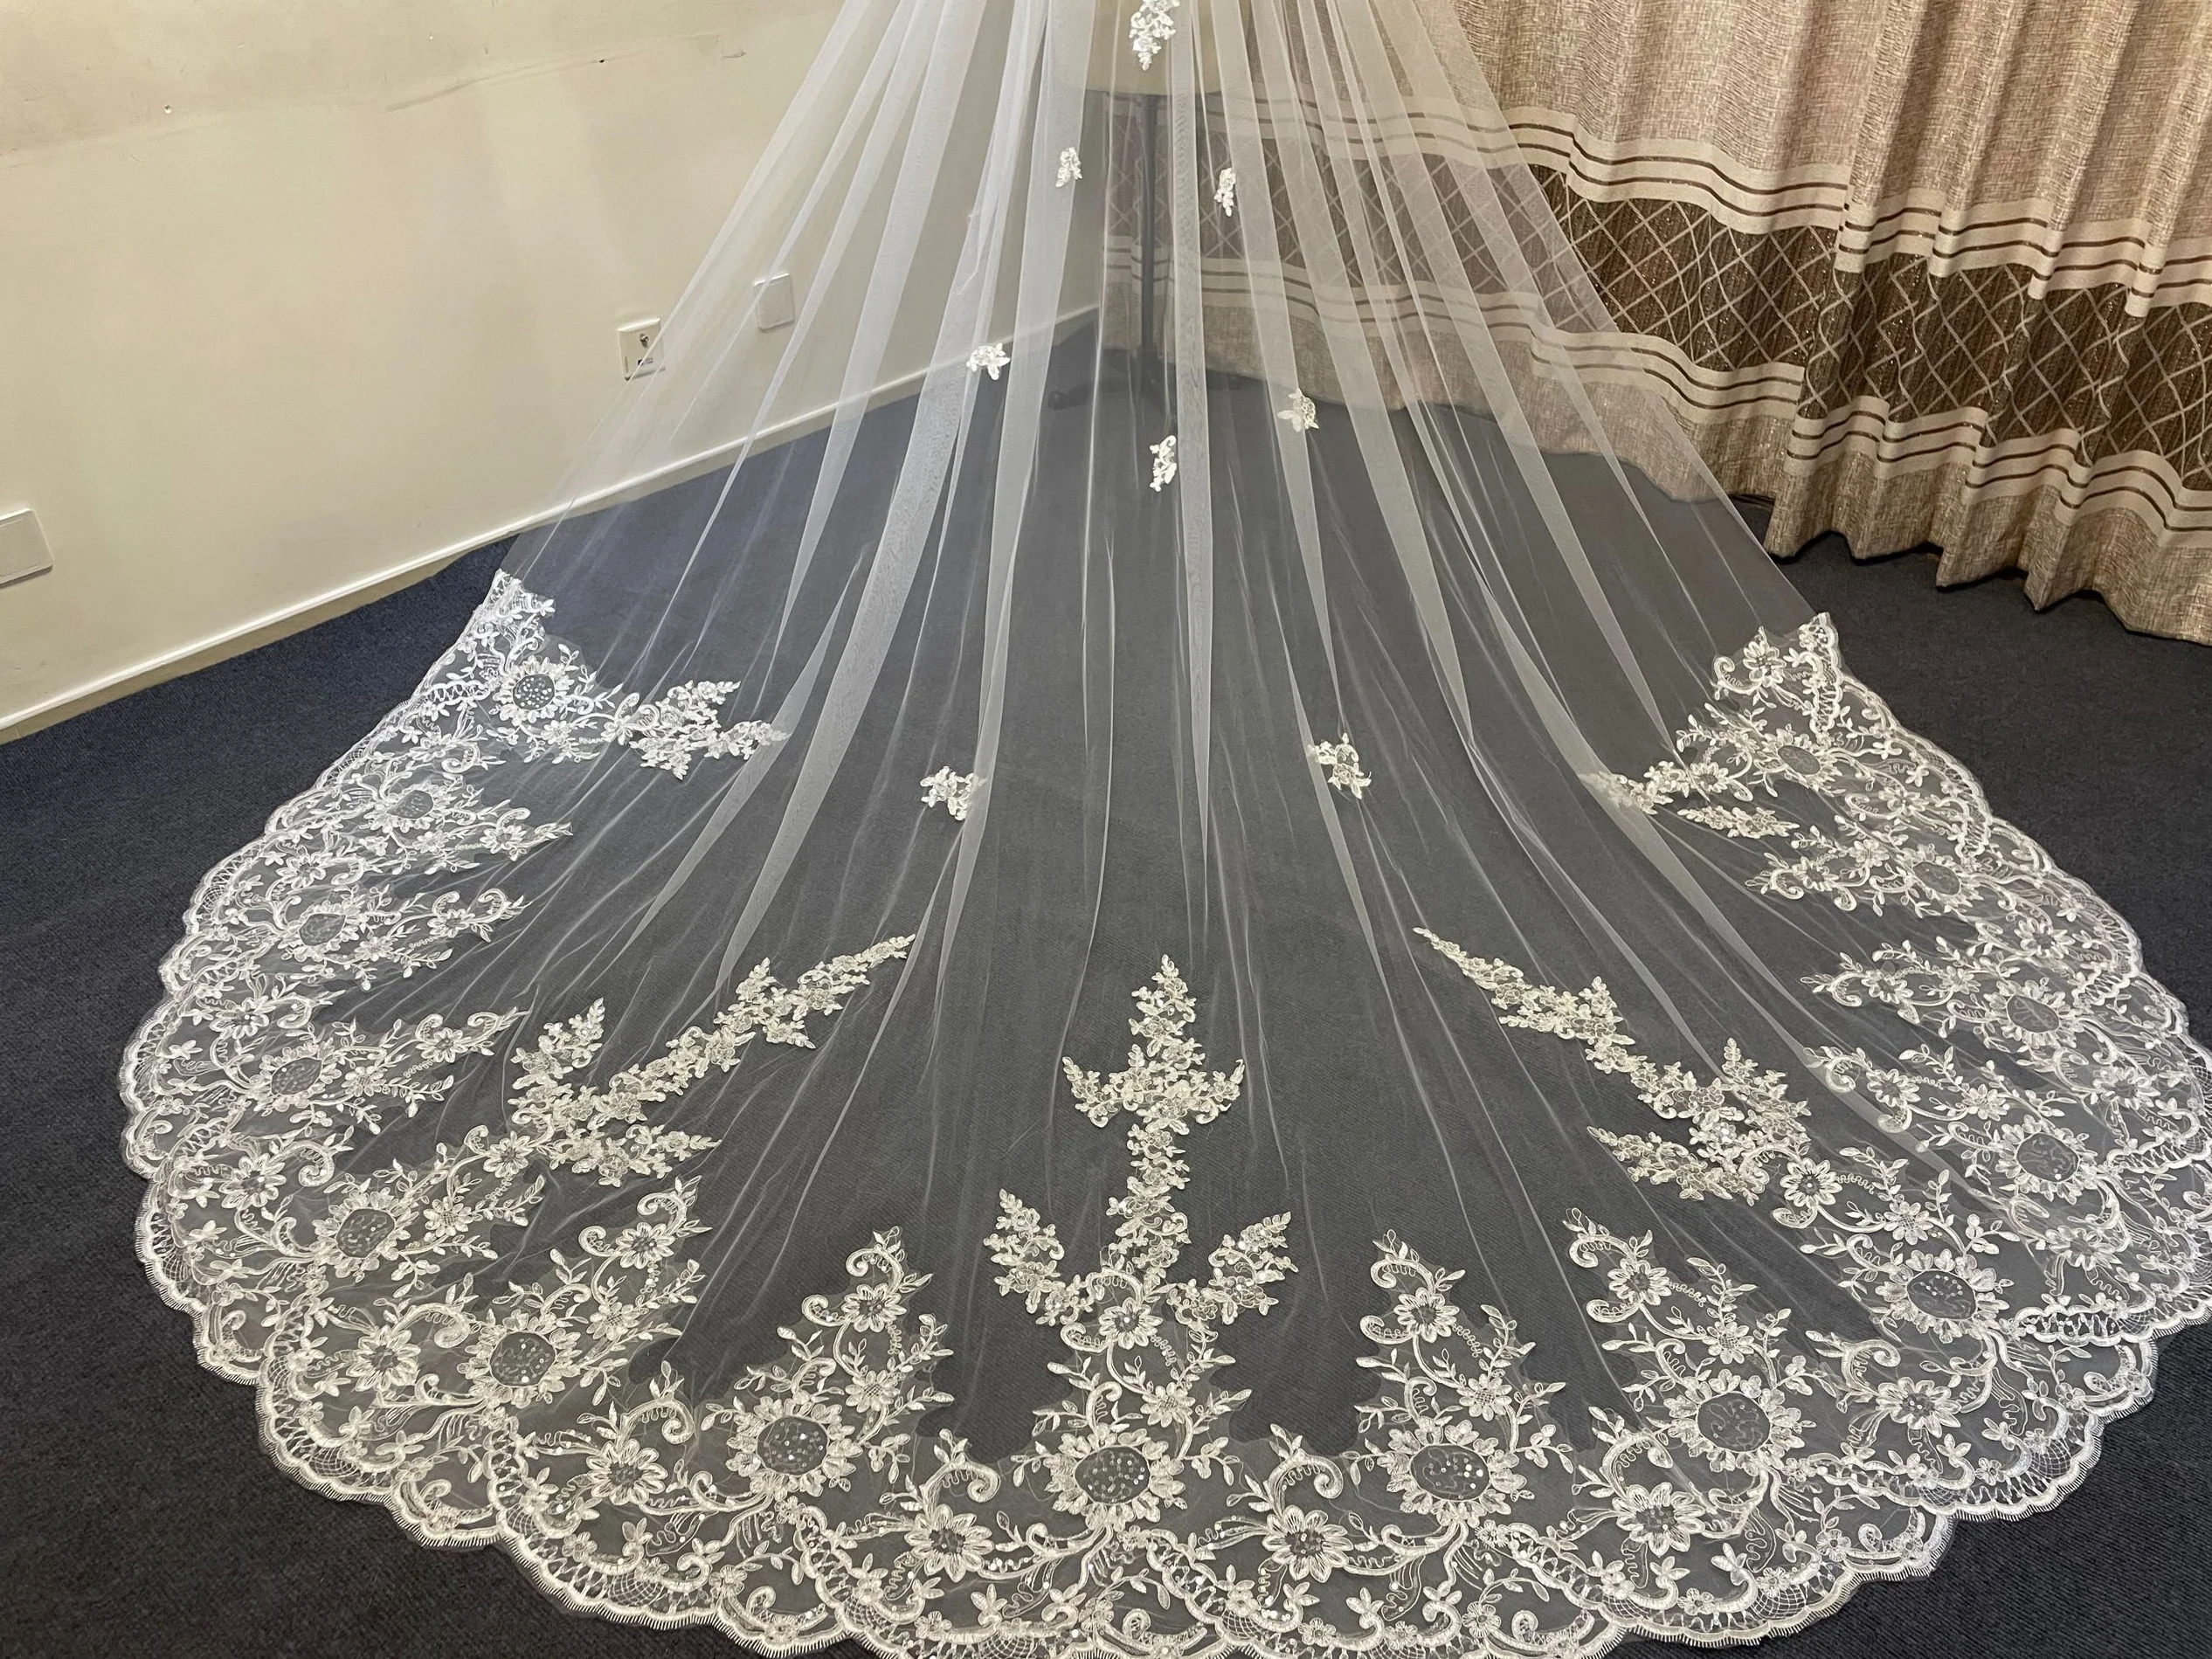 FAIOKAVER Wedding Veils White 1 Tier Sequins Lace Cathedral Long with Comb